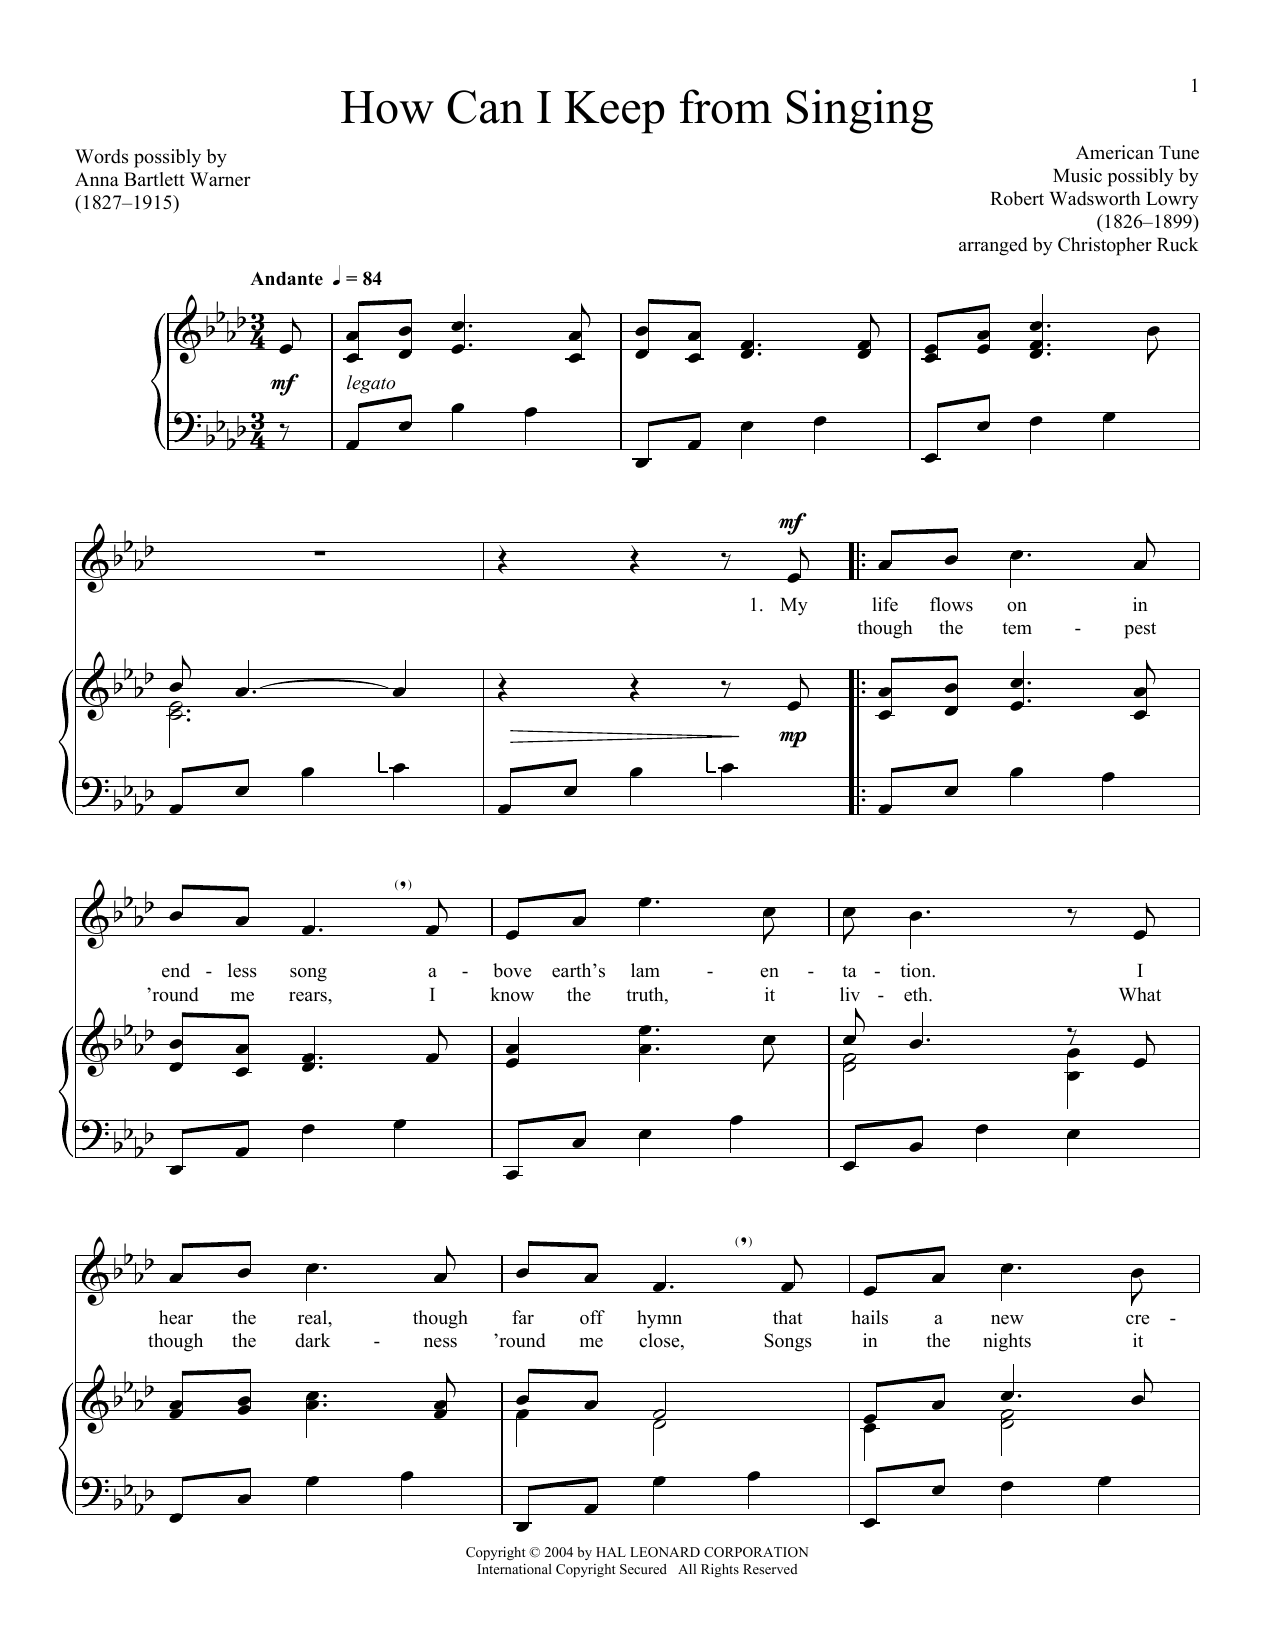 American Folk Hymn How Can I Keep From Singing sheet music notes and chords. Download Printable PDF.